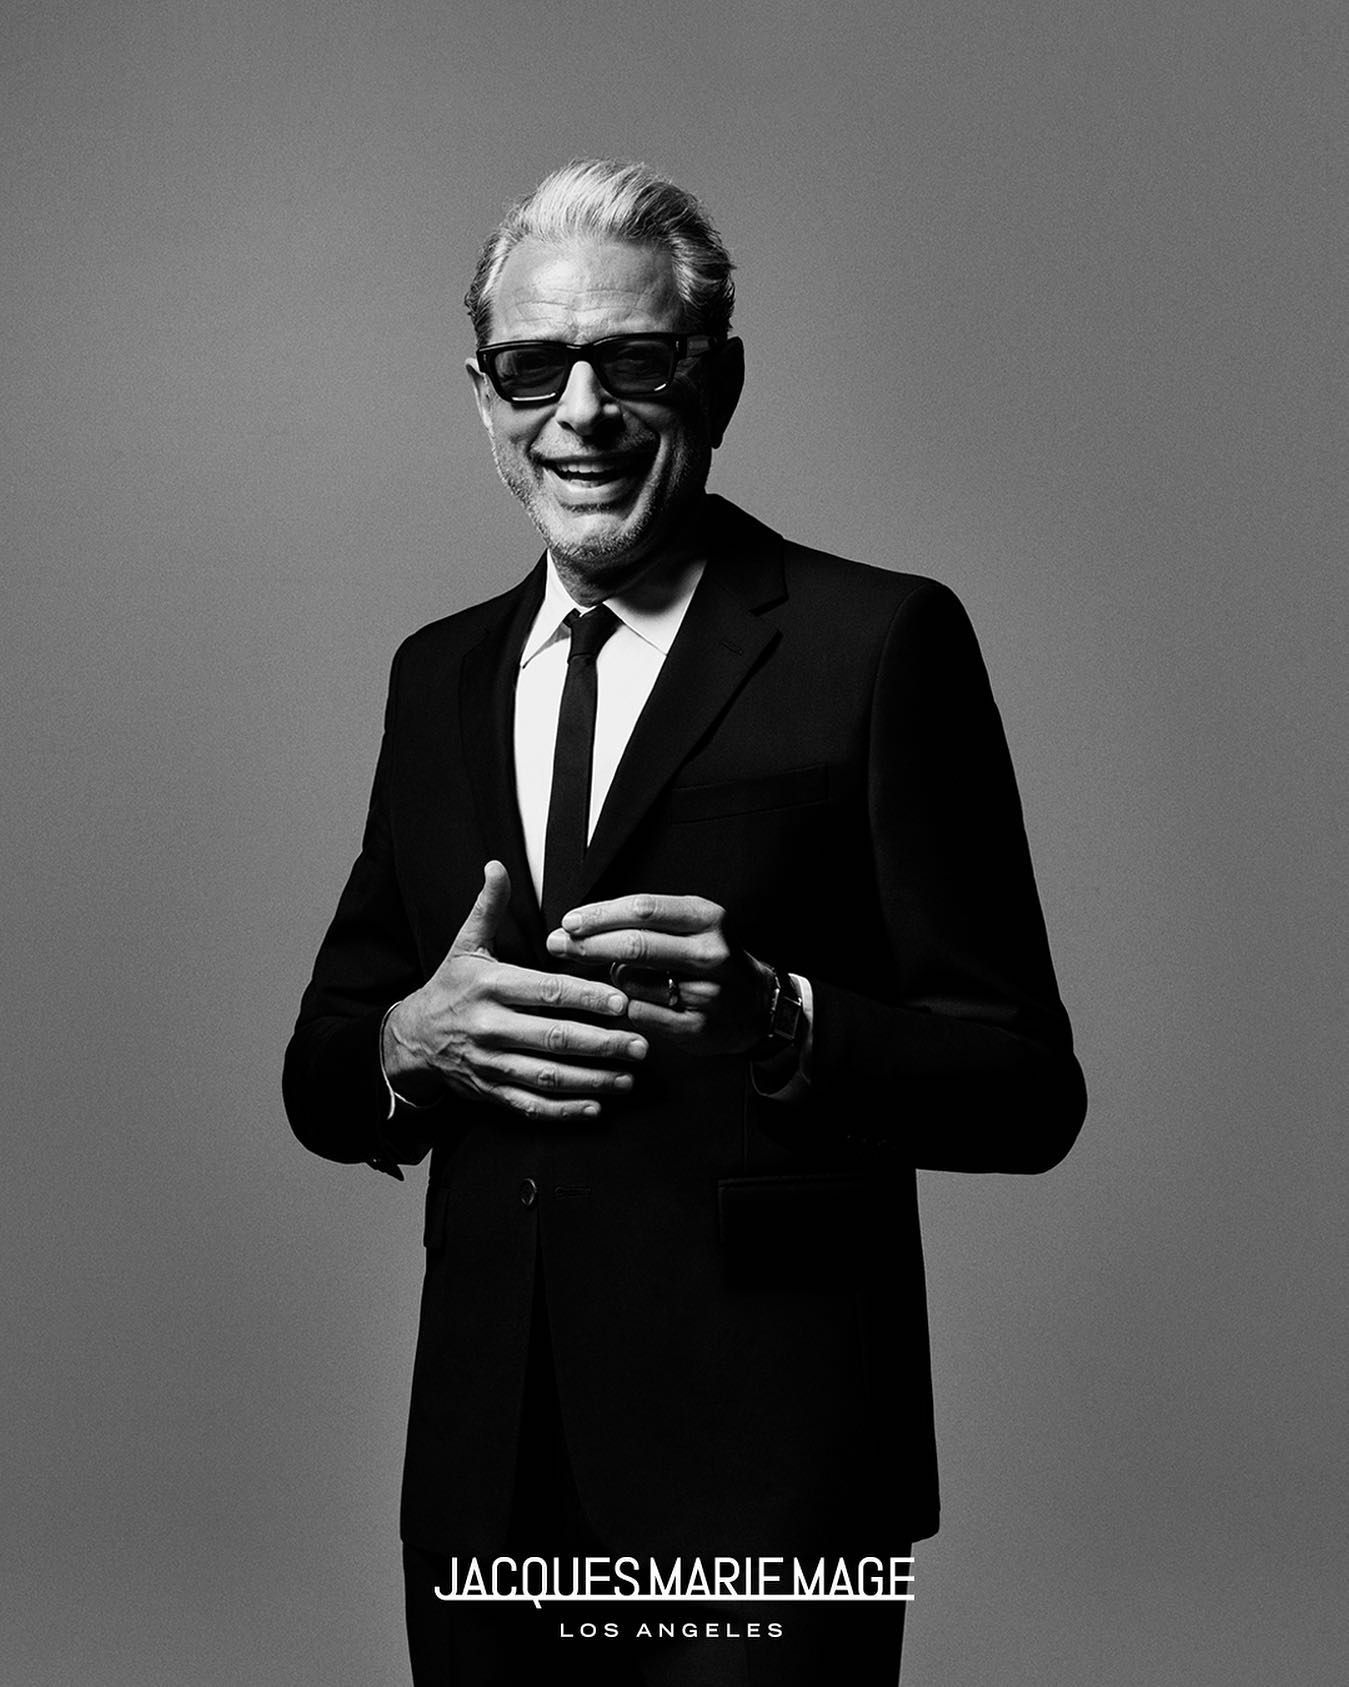 Jacques Marie Mage Is The King Of Sunglasses – Here's Why